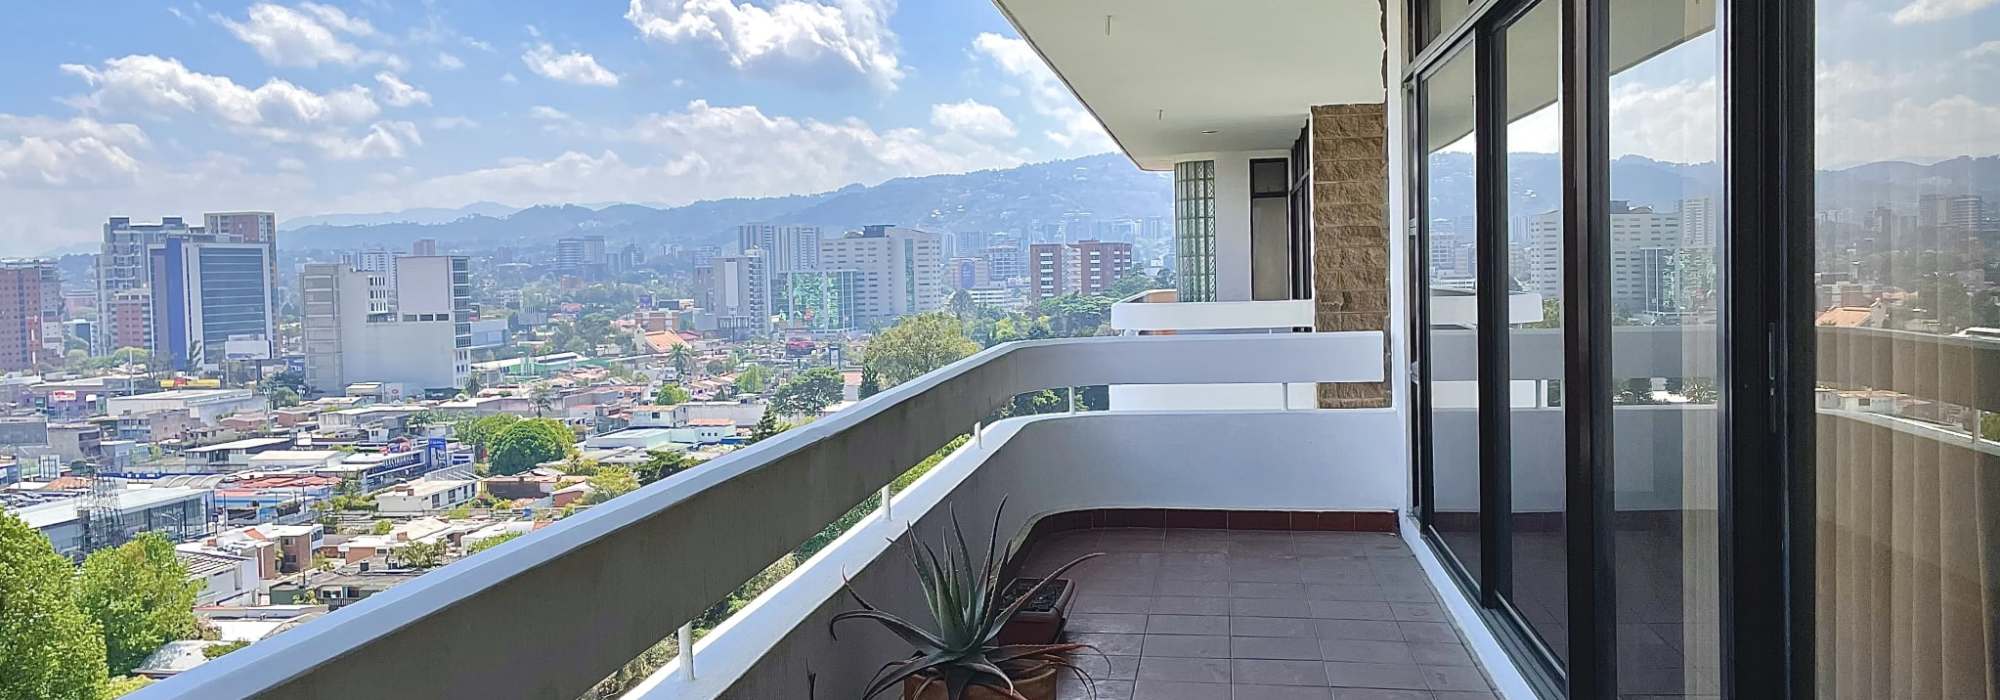 Apartment for sale, Z14, spacious with 3 balconies and panoramic views.